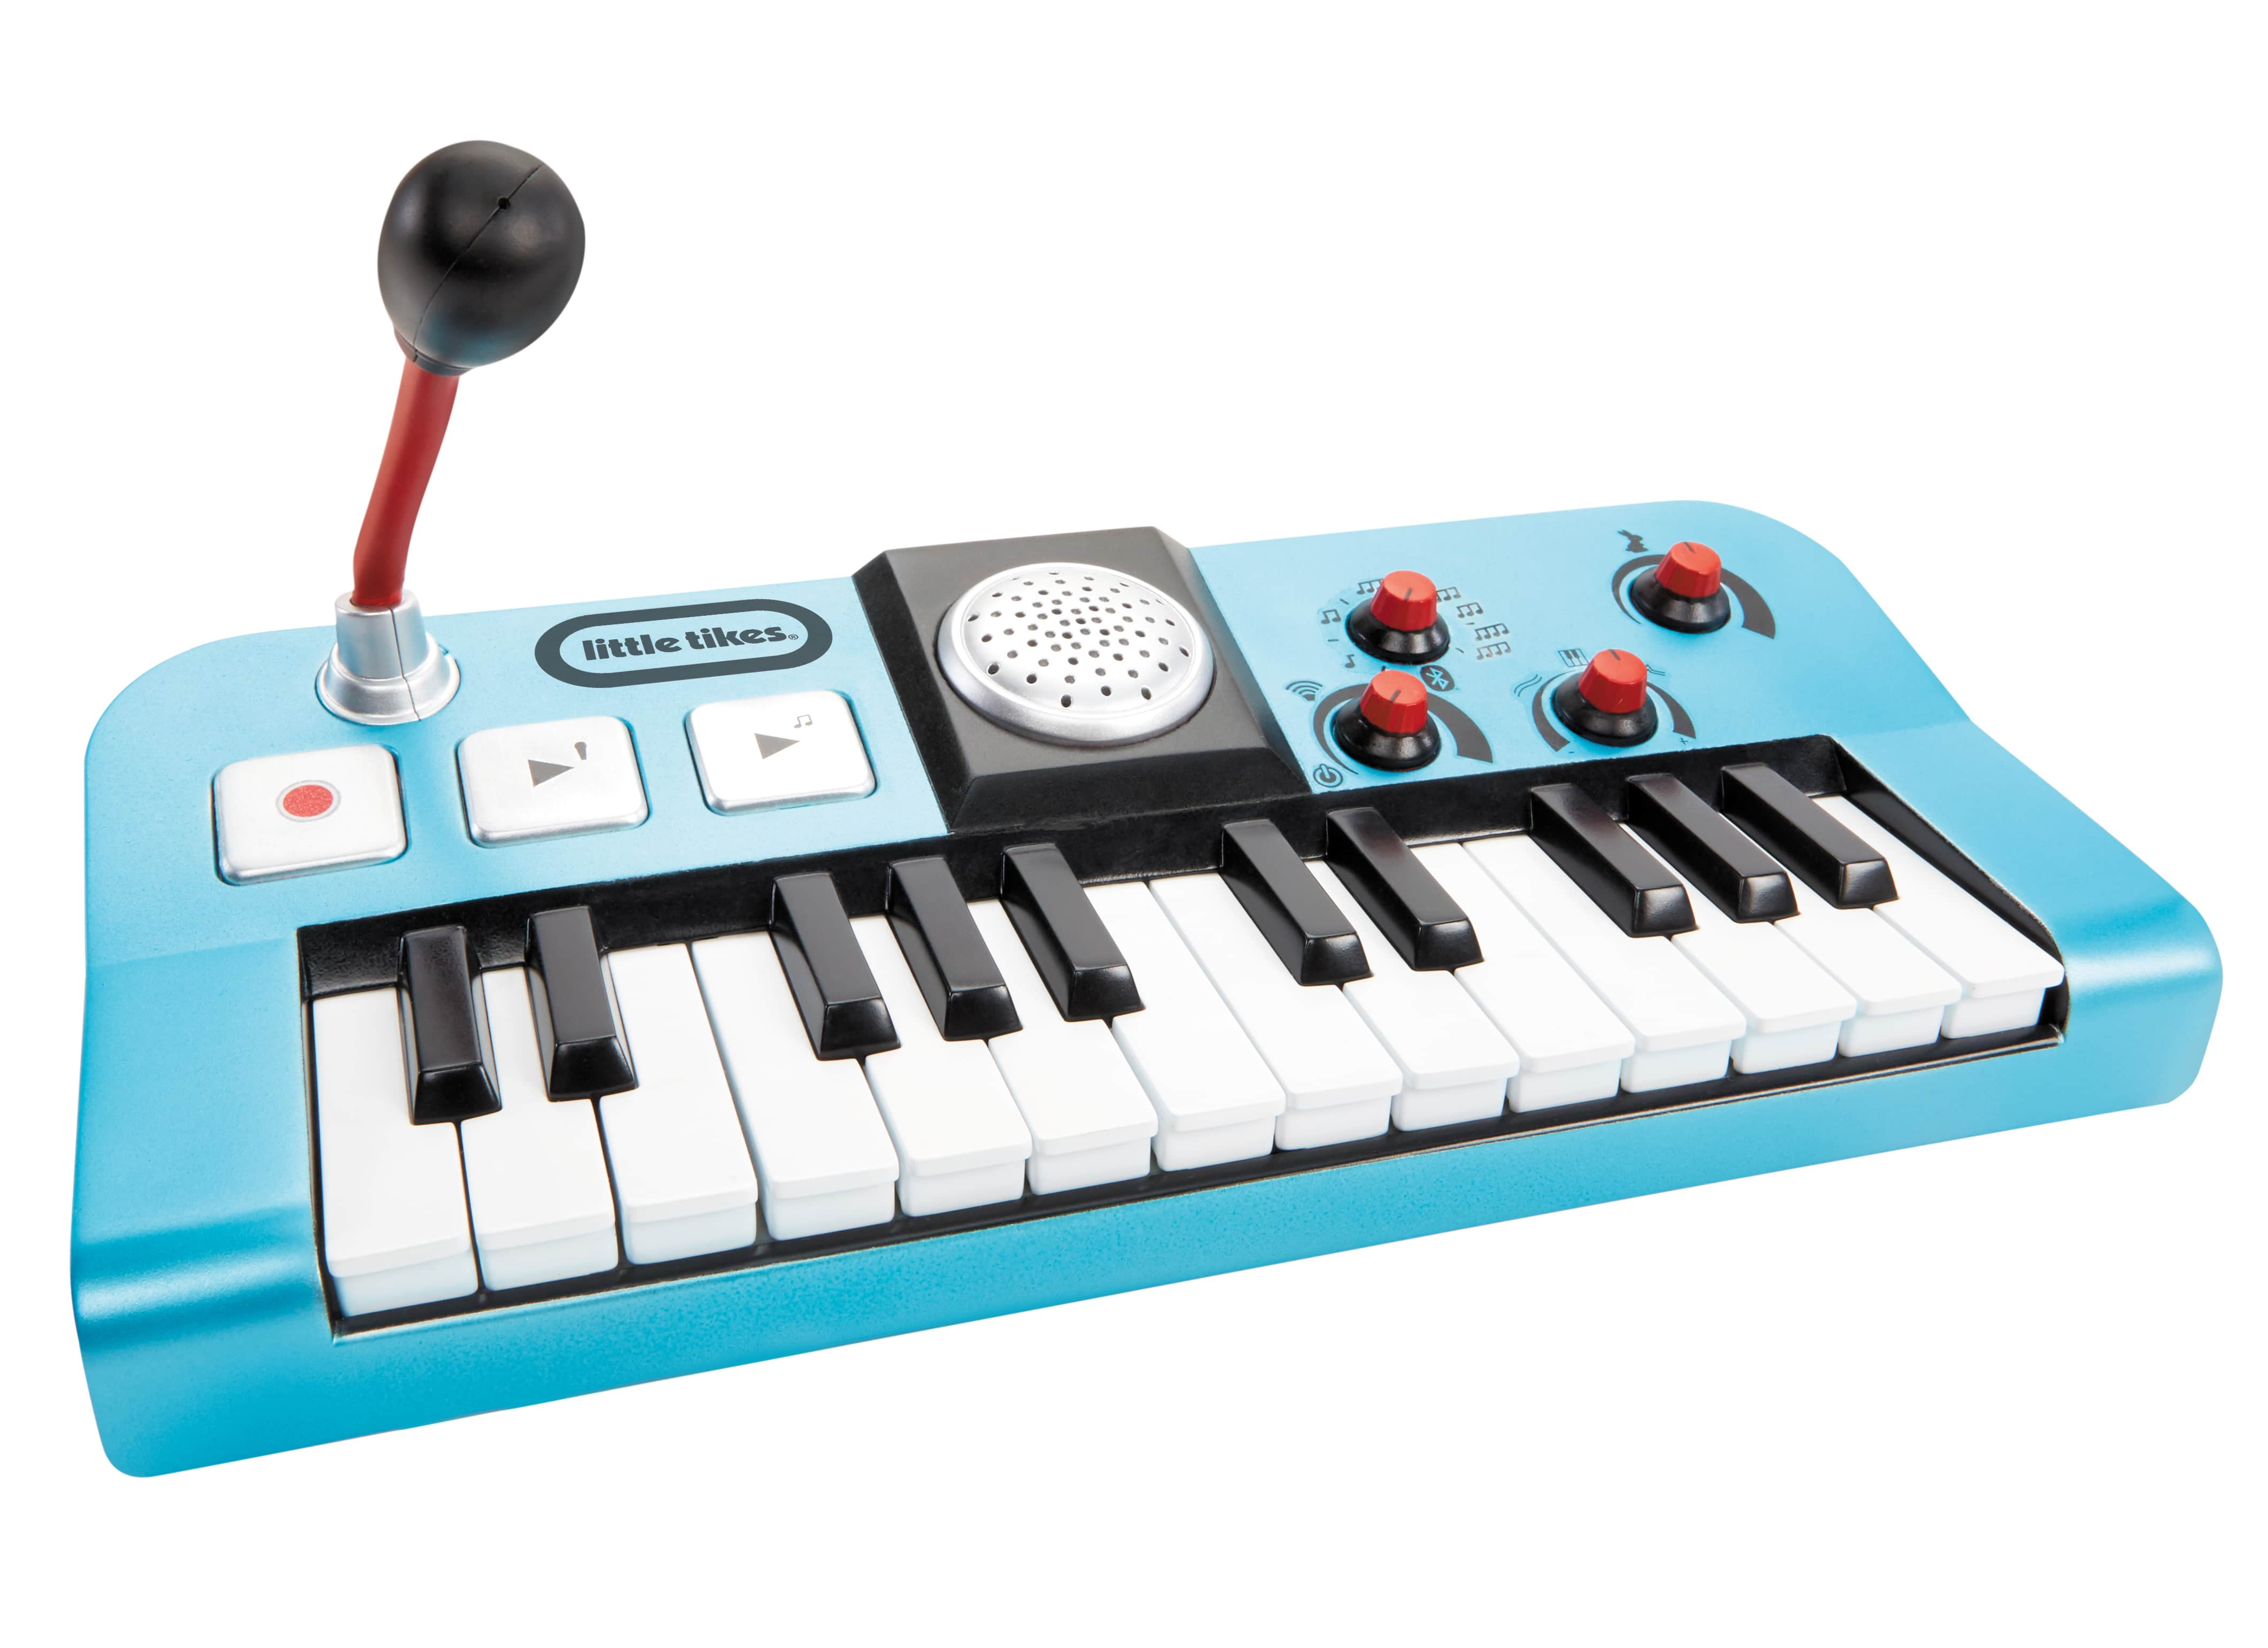 Little Tikes My Keyboard with Microphone, Toy Musical Instrument 4 Play Modes, Play Any with Bluetooth- For Kids Boys Girls Ages 3 4 5+ Year Old - Walmart.com